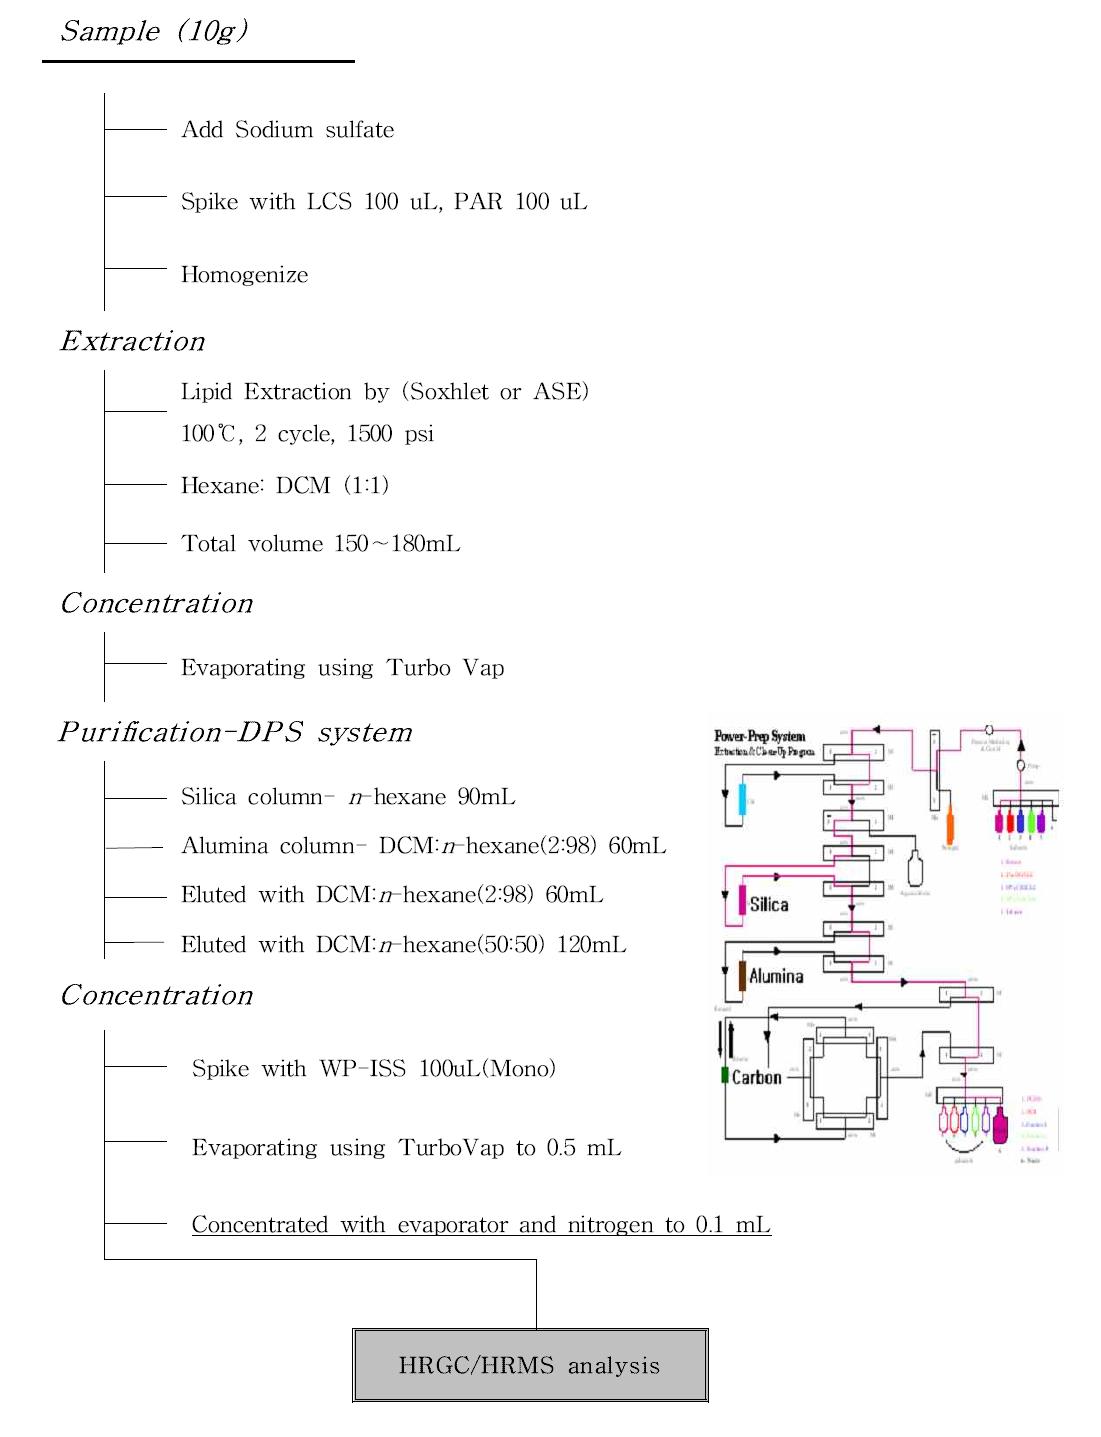 Schematic diagram for DL-PCBs analysis.